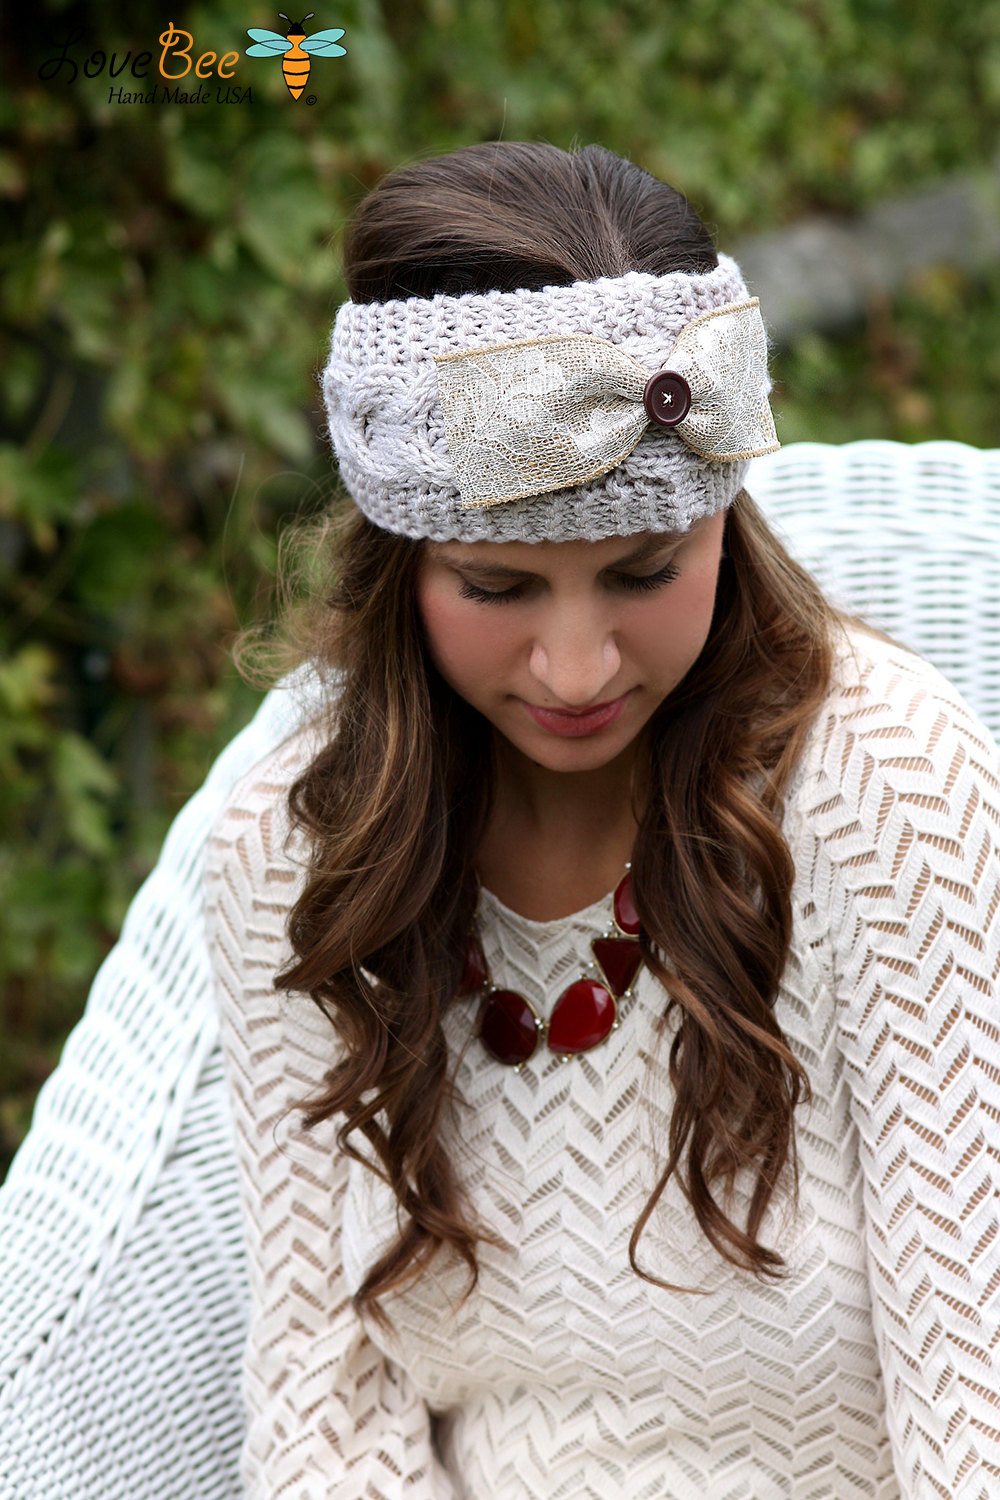 Headband - Large Bow, Knitted , Cable Knit , Gray ,infinity, Wood Button, Lace, Linen,Wide Headband, Turban, Christmas Gift